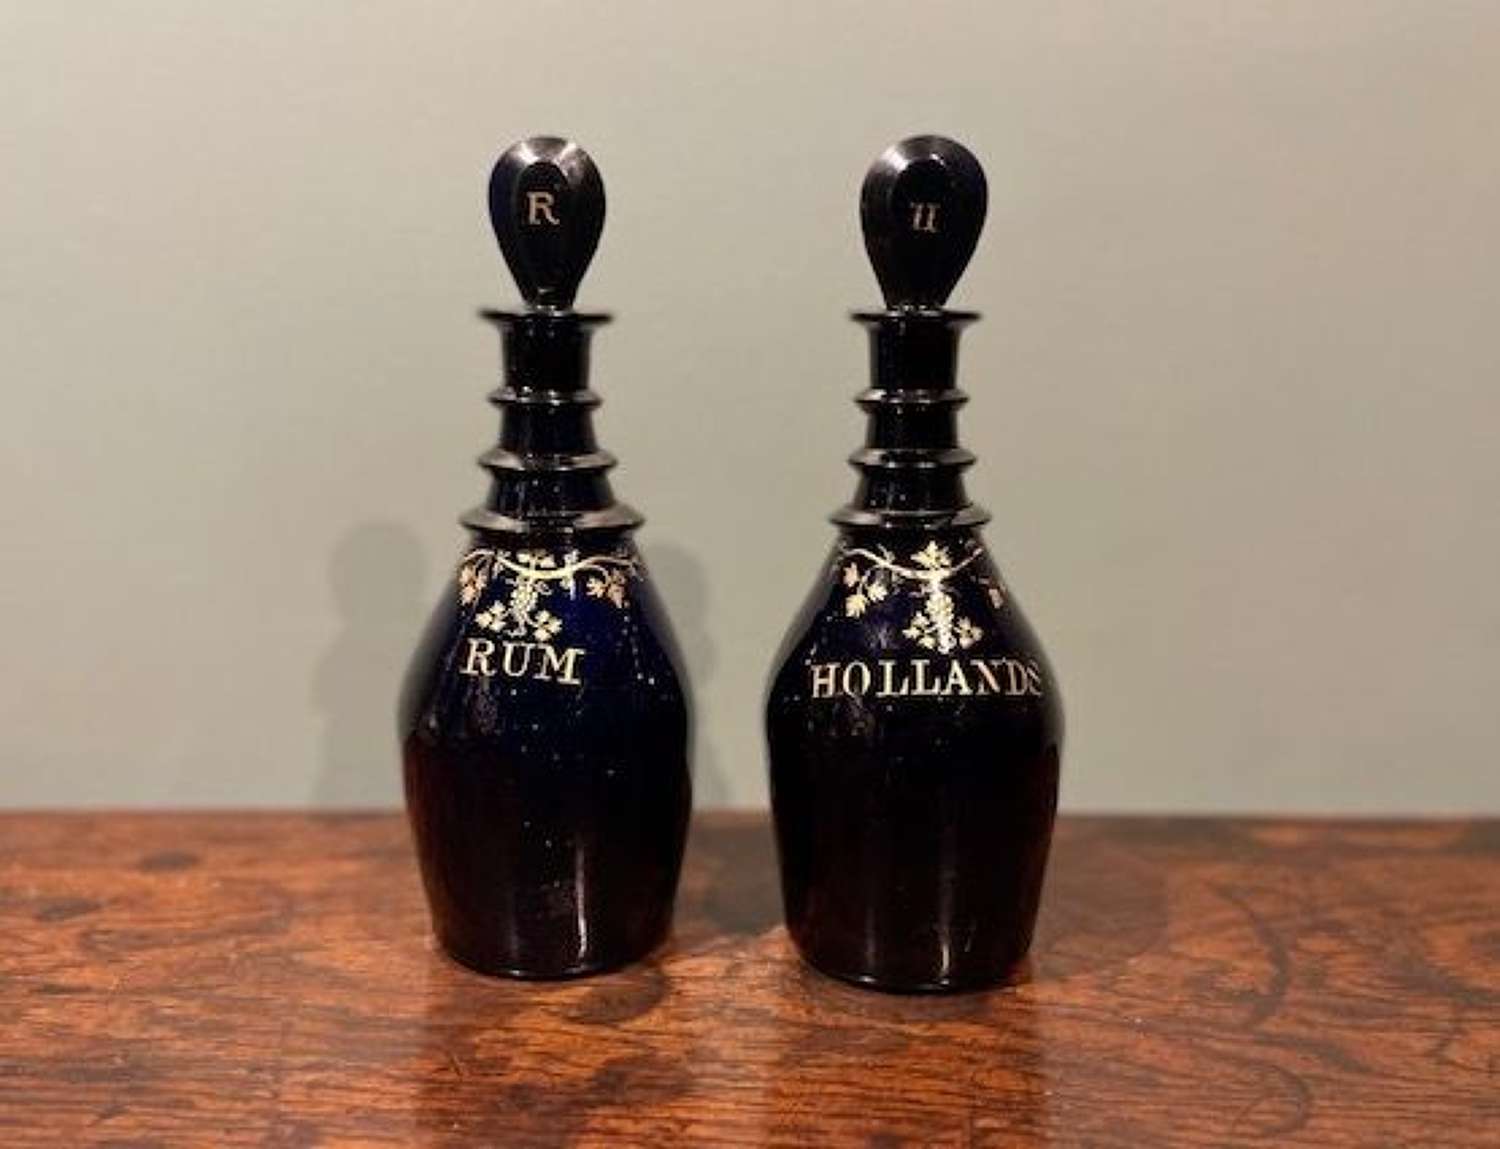 A pair of Regency 'Bristol blue' spirit decanters - Rum and Hollands